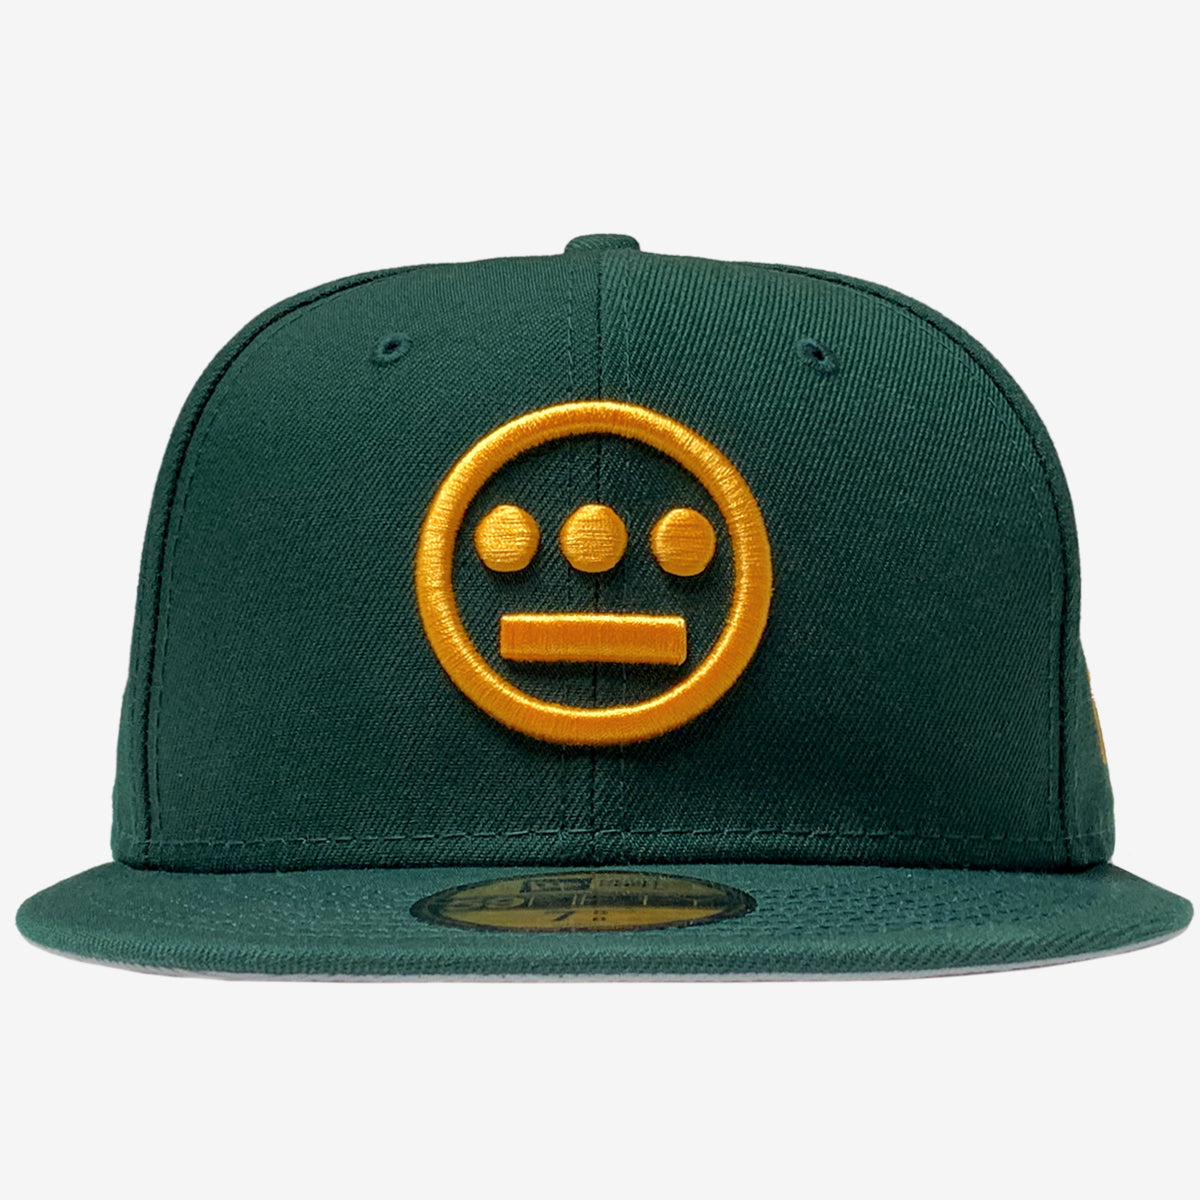 Green New Era cap with gold embroidered Hieroglyphics hip-hop logo on the crown.